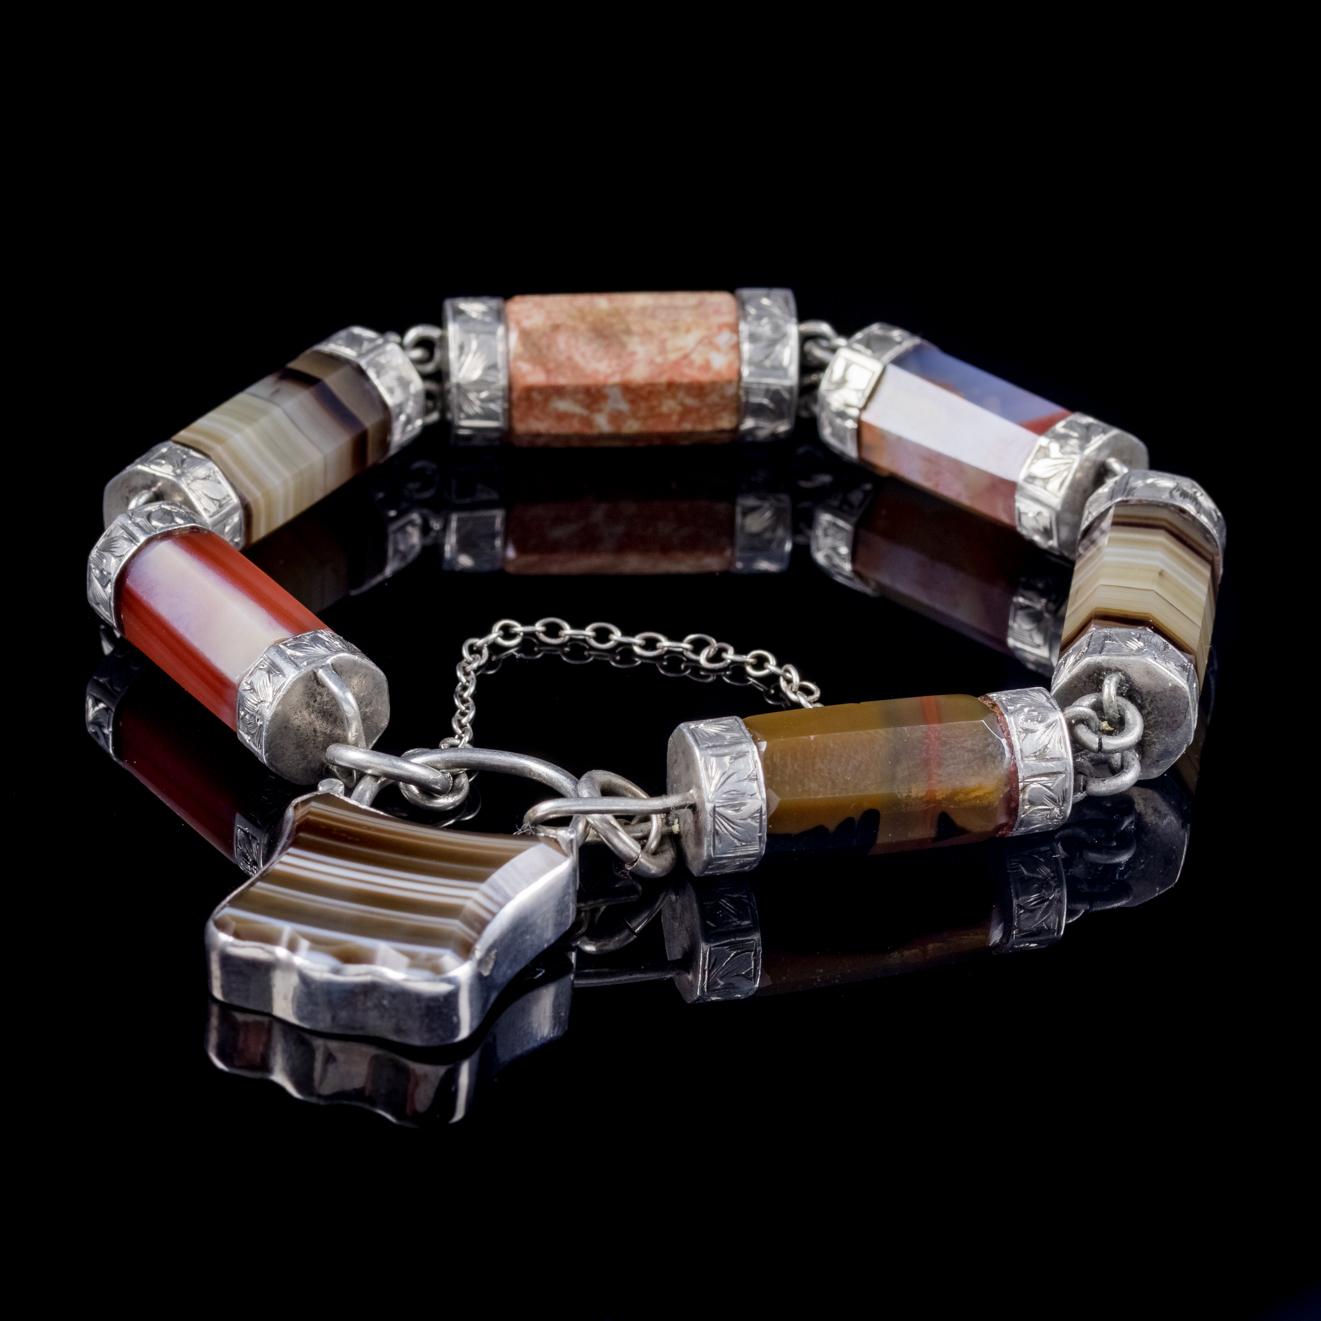 A wonderful antique Victorian Scottish bracelet C. 1860, made up of lovely barrel Agate links set with engraved Silver tips. 

Scottish jewellery was made popular by Queen Victoria as it became a souvenir of her frequent trips to Scotland and her